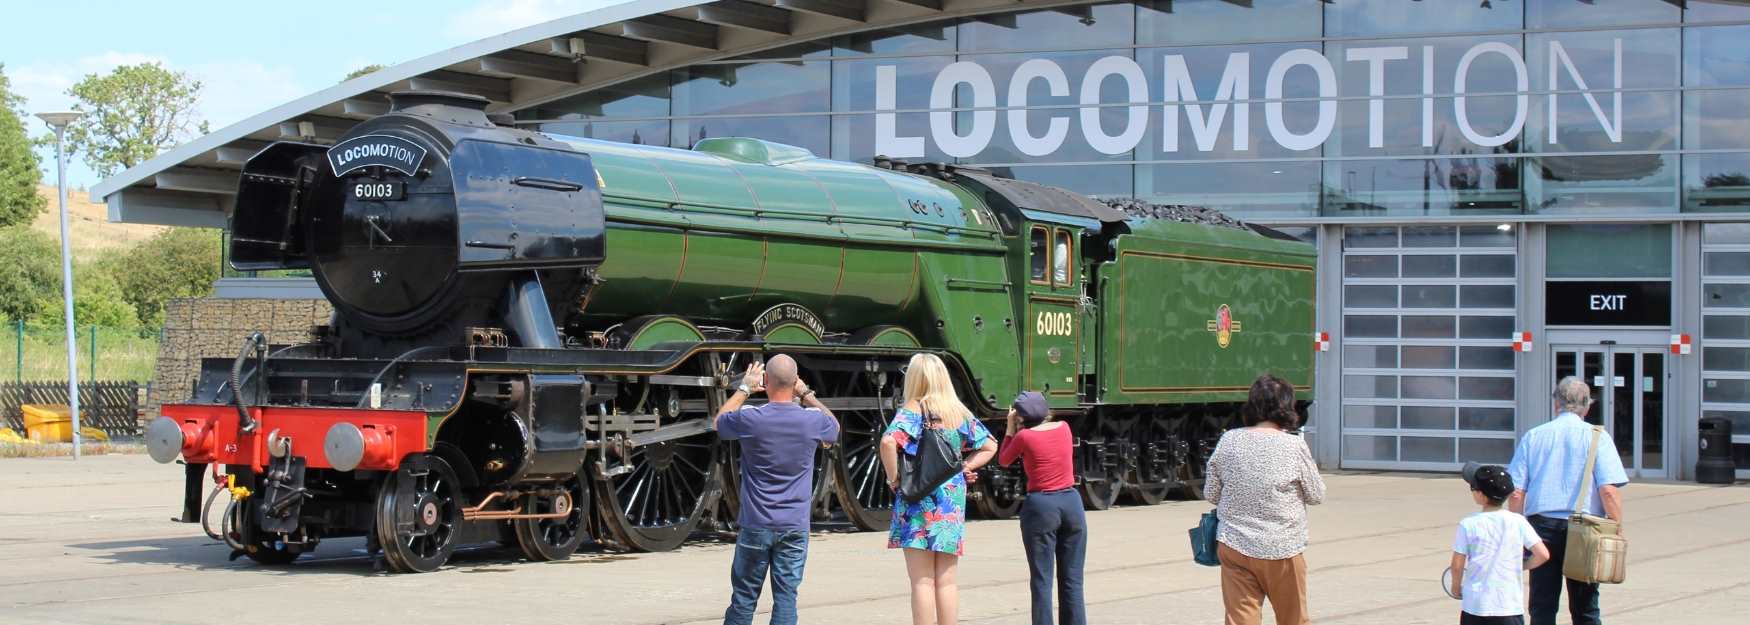 People looking at a train at Locomotion